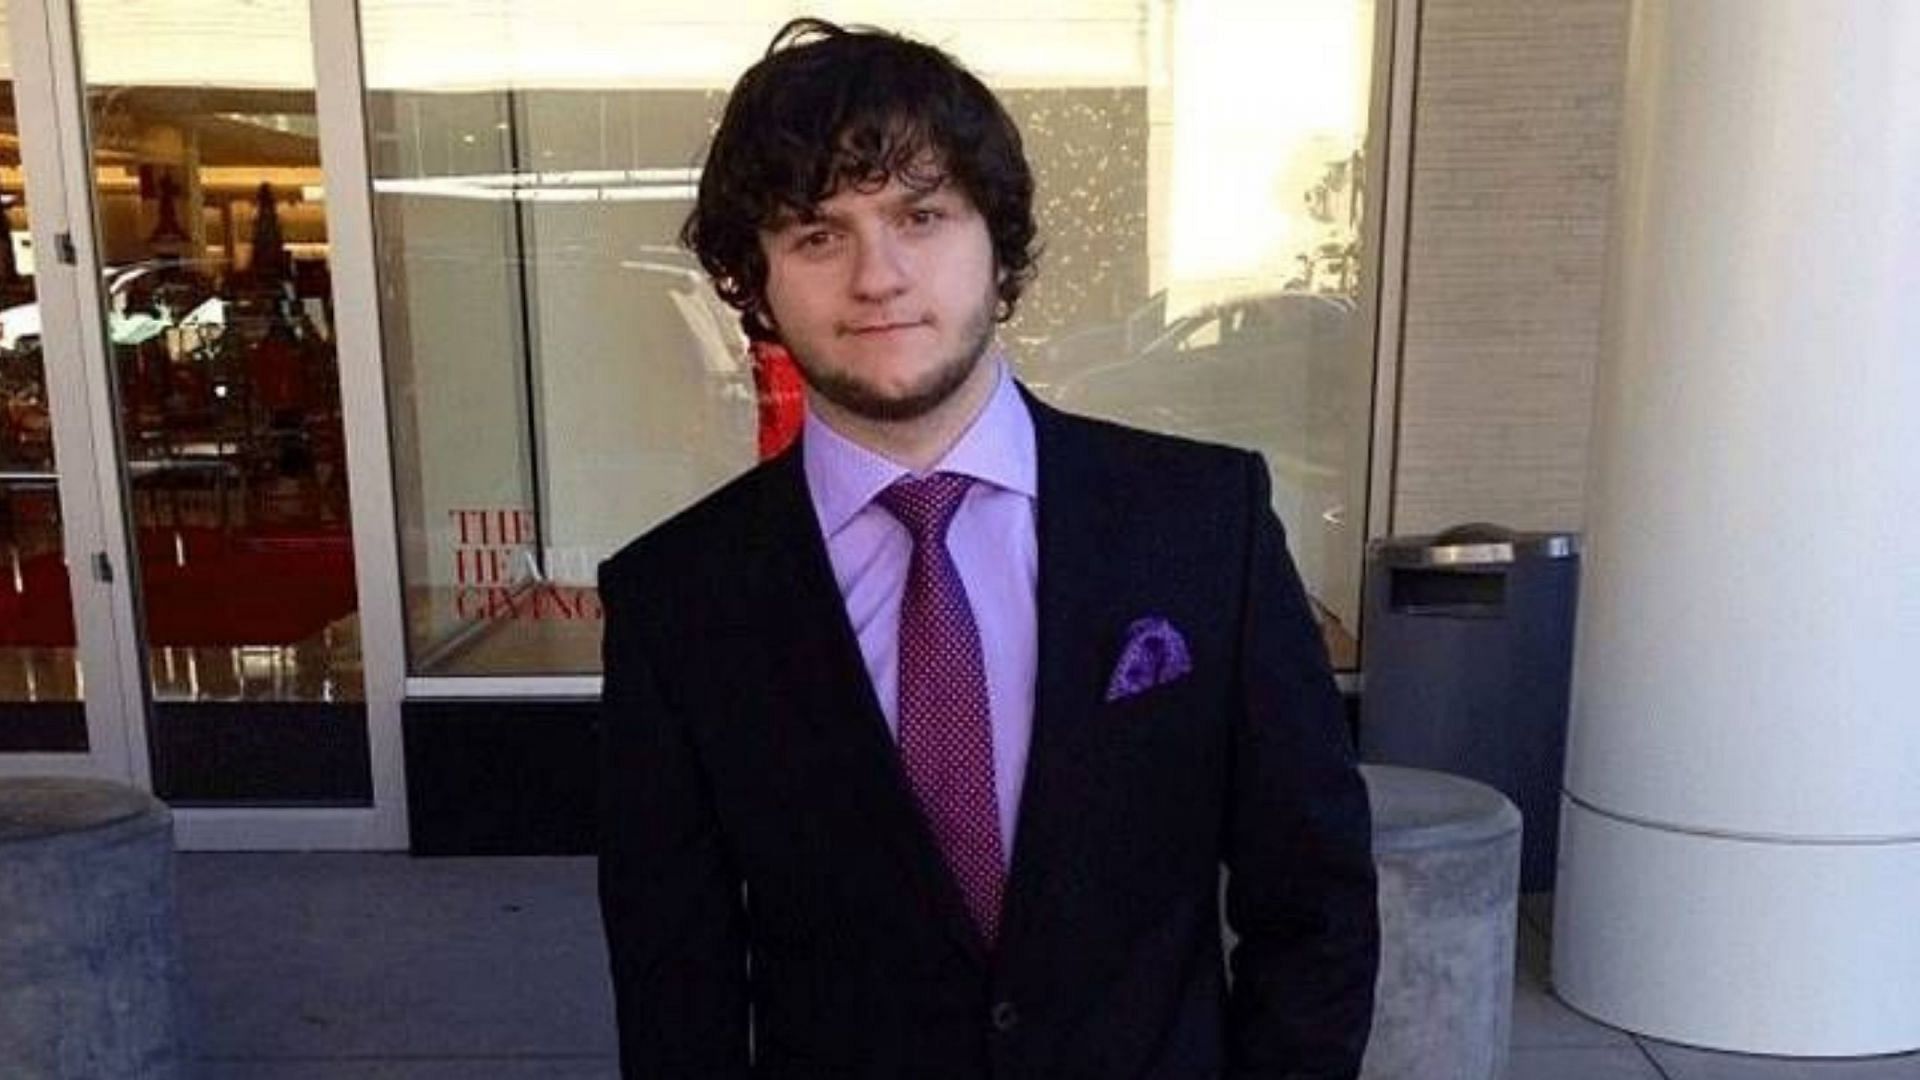 SkyDoesMinecraft accused of abuse and assault (Image via Google)